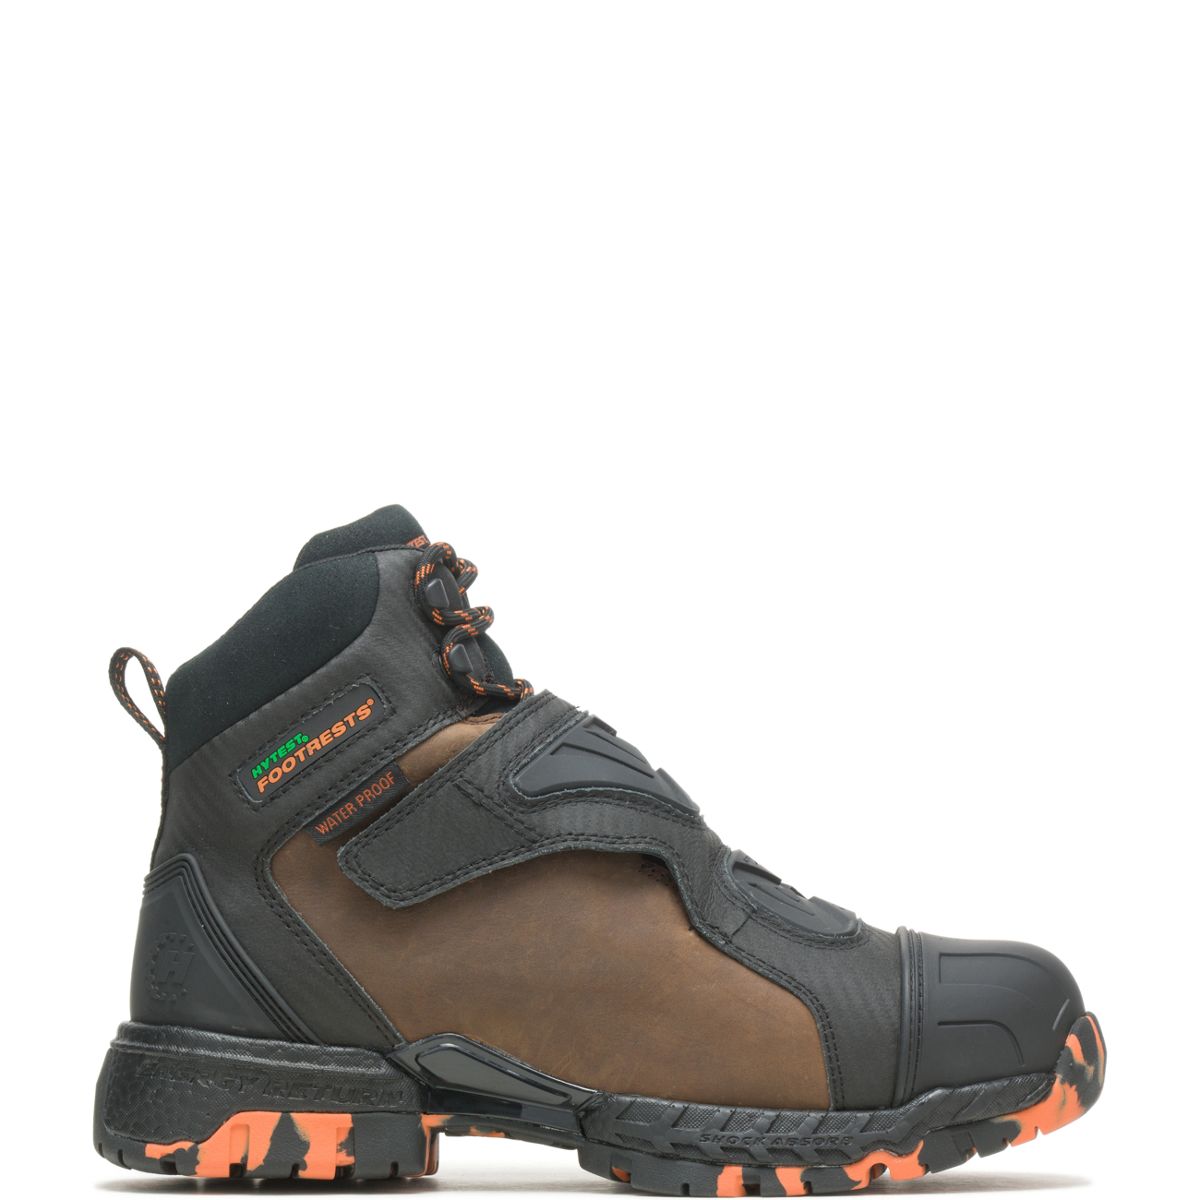 HYDROX Integral GR boots with felt sole